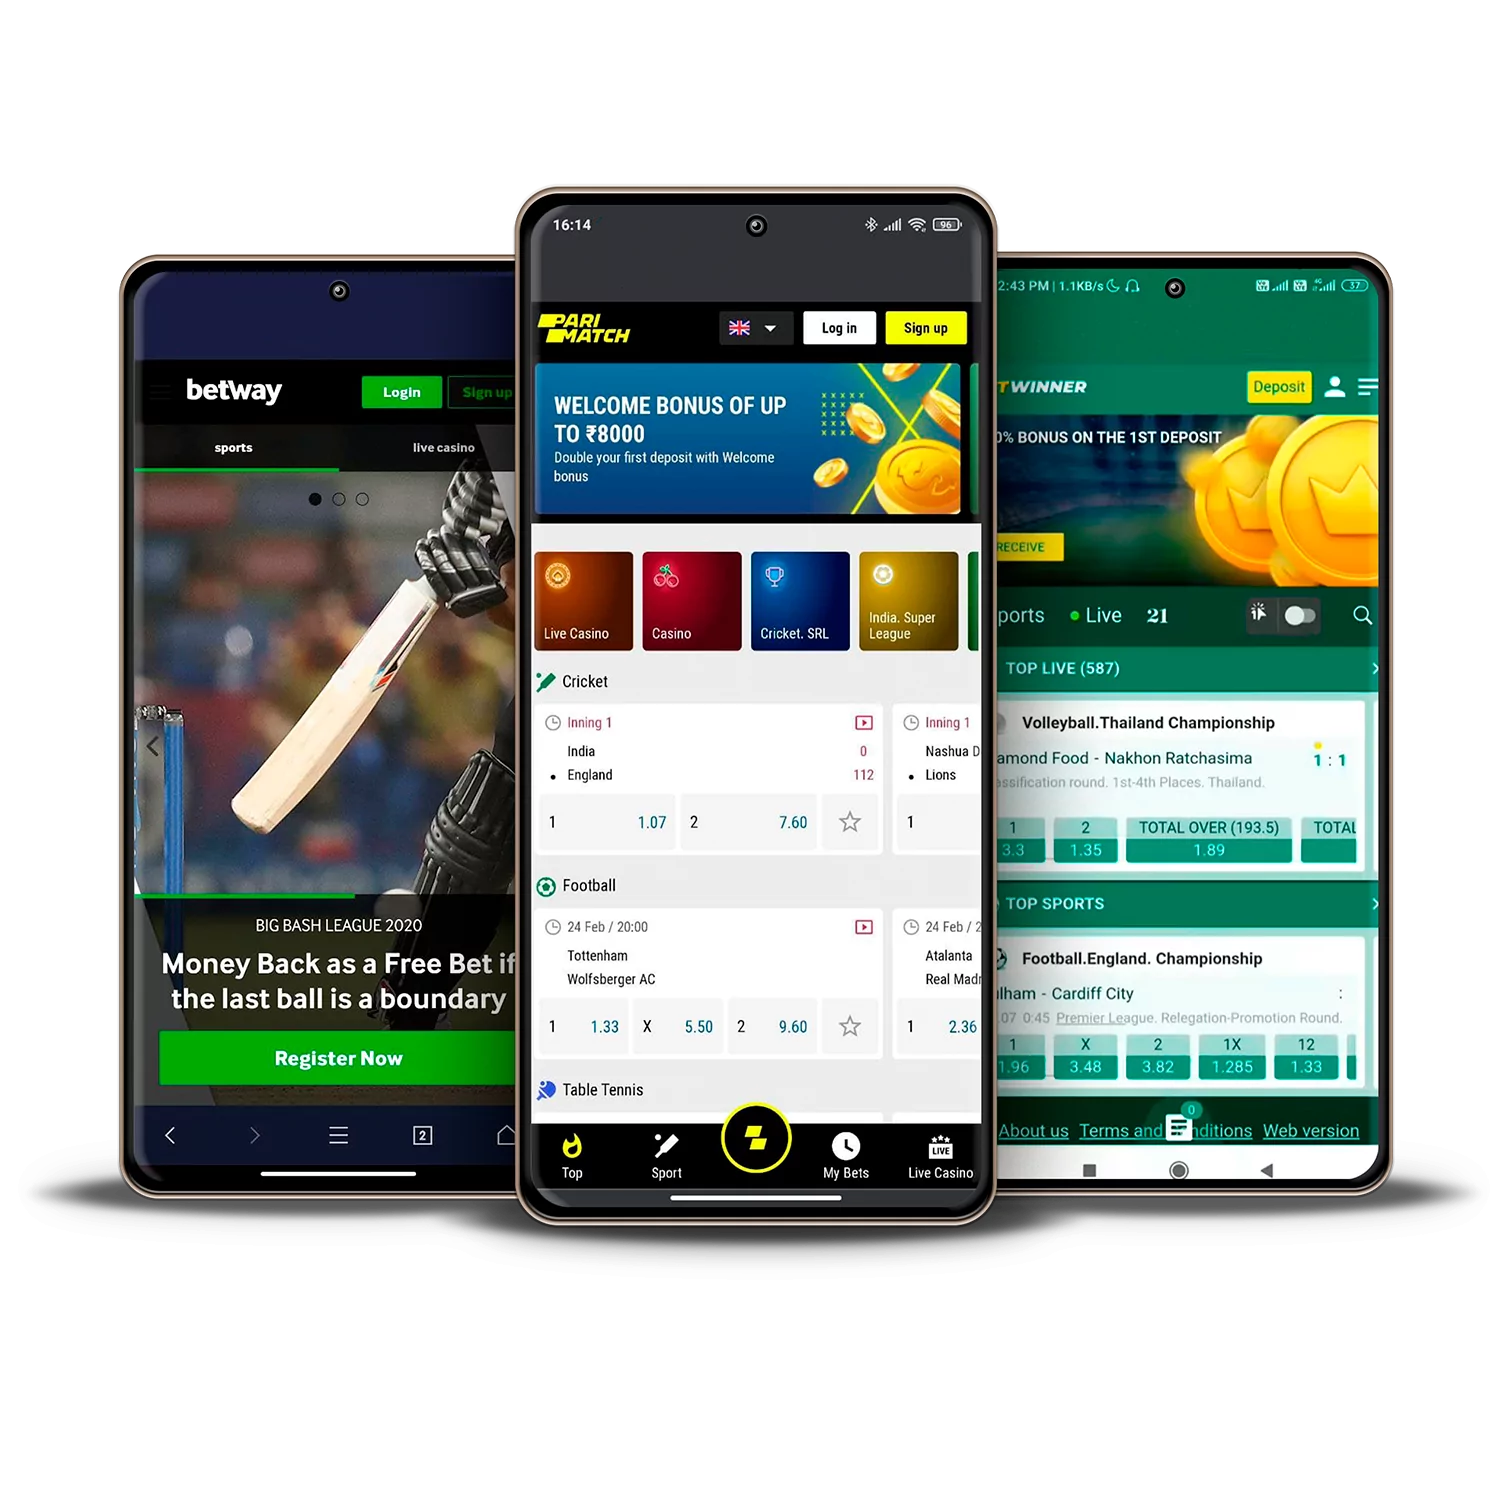 Read our review and make the right choice of cricket betting app.